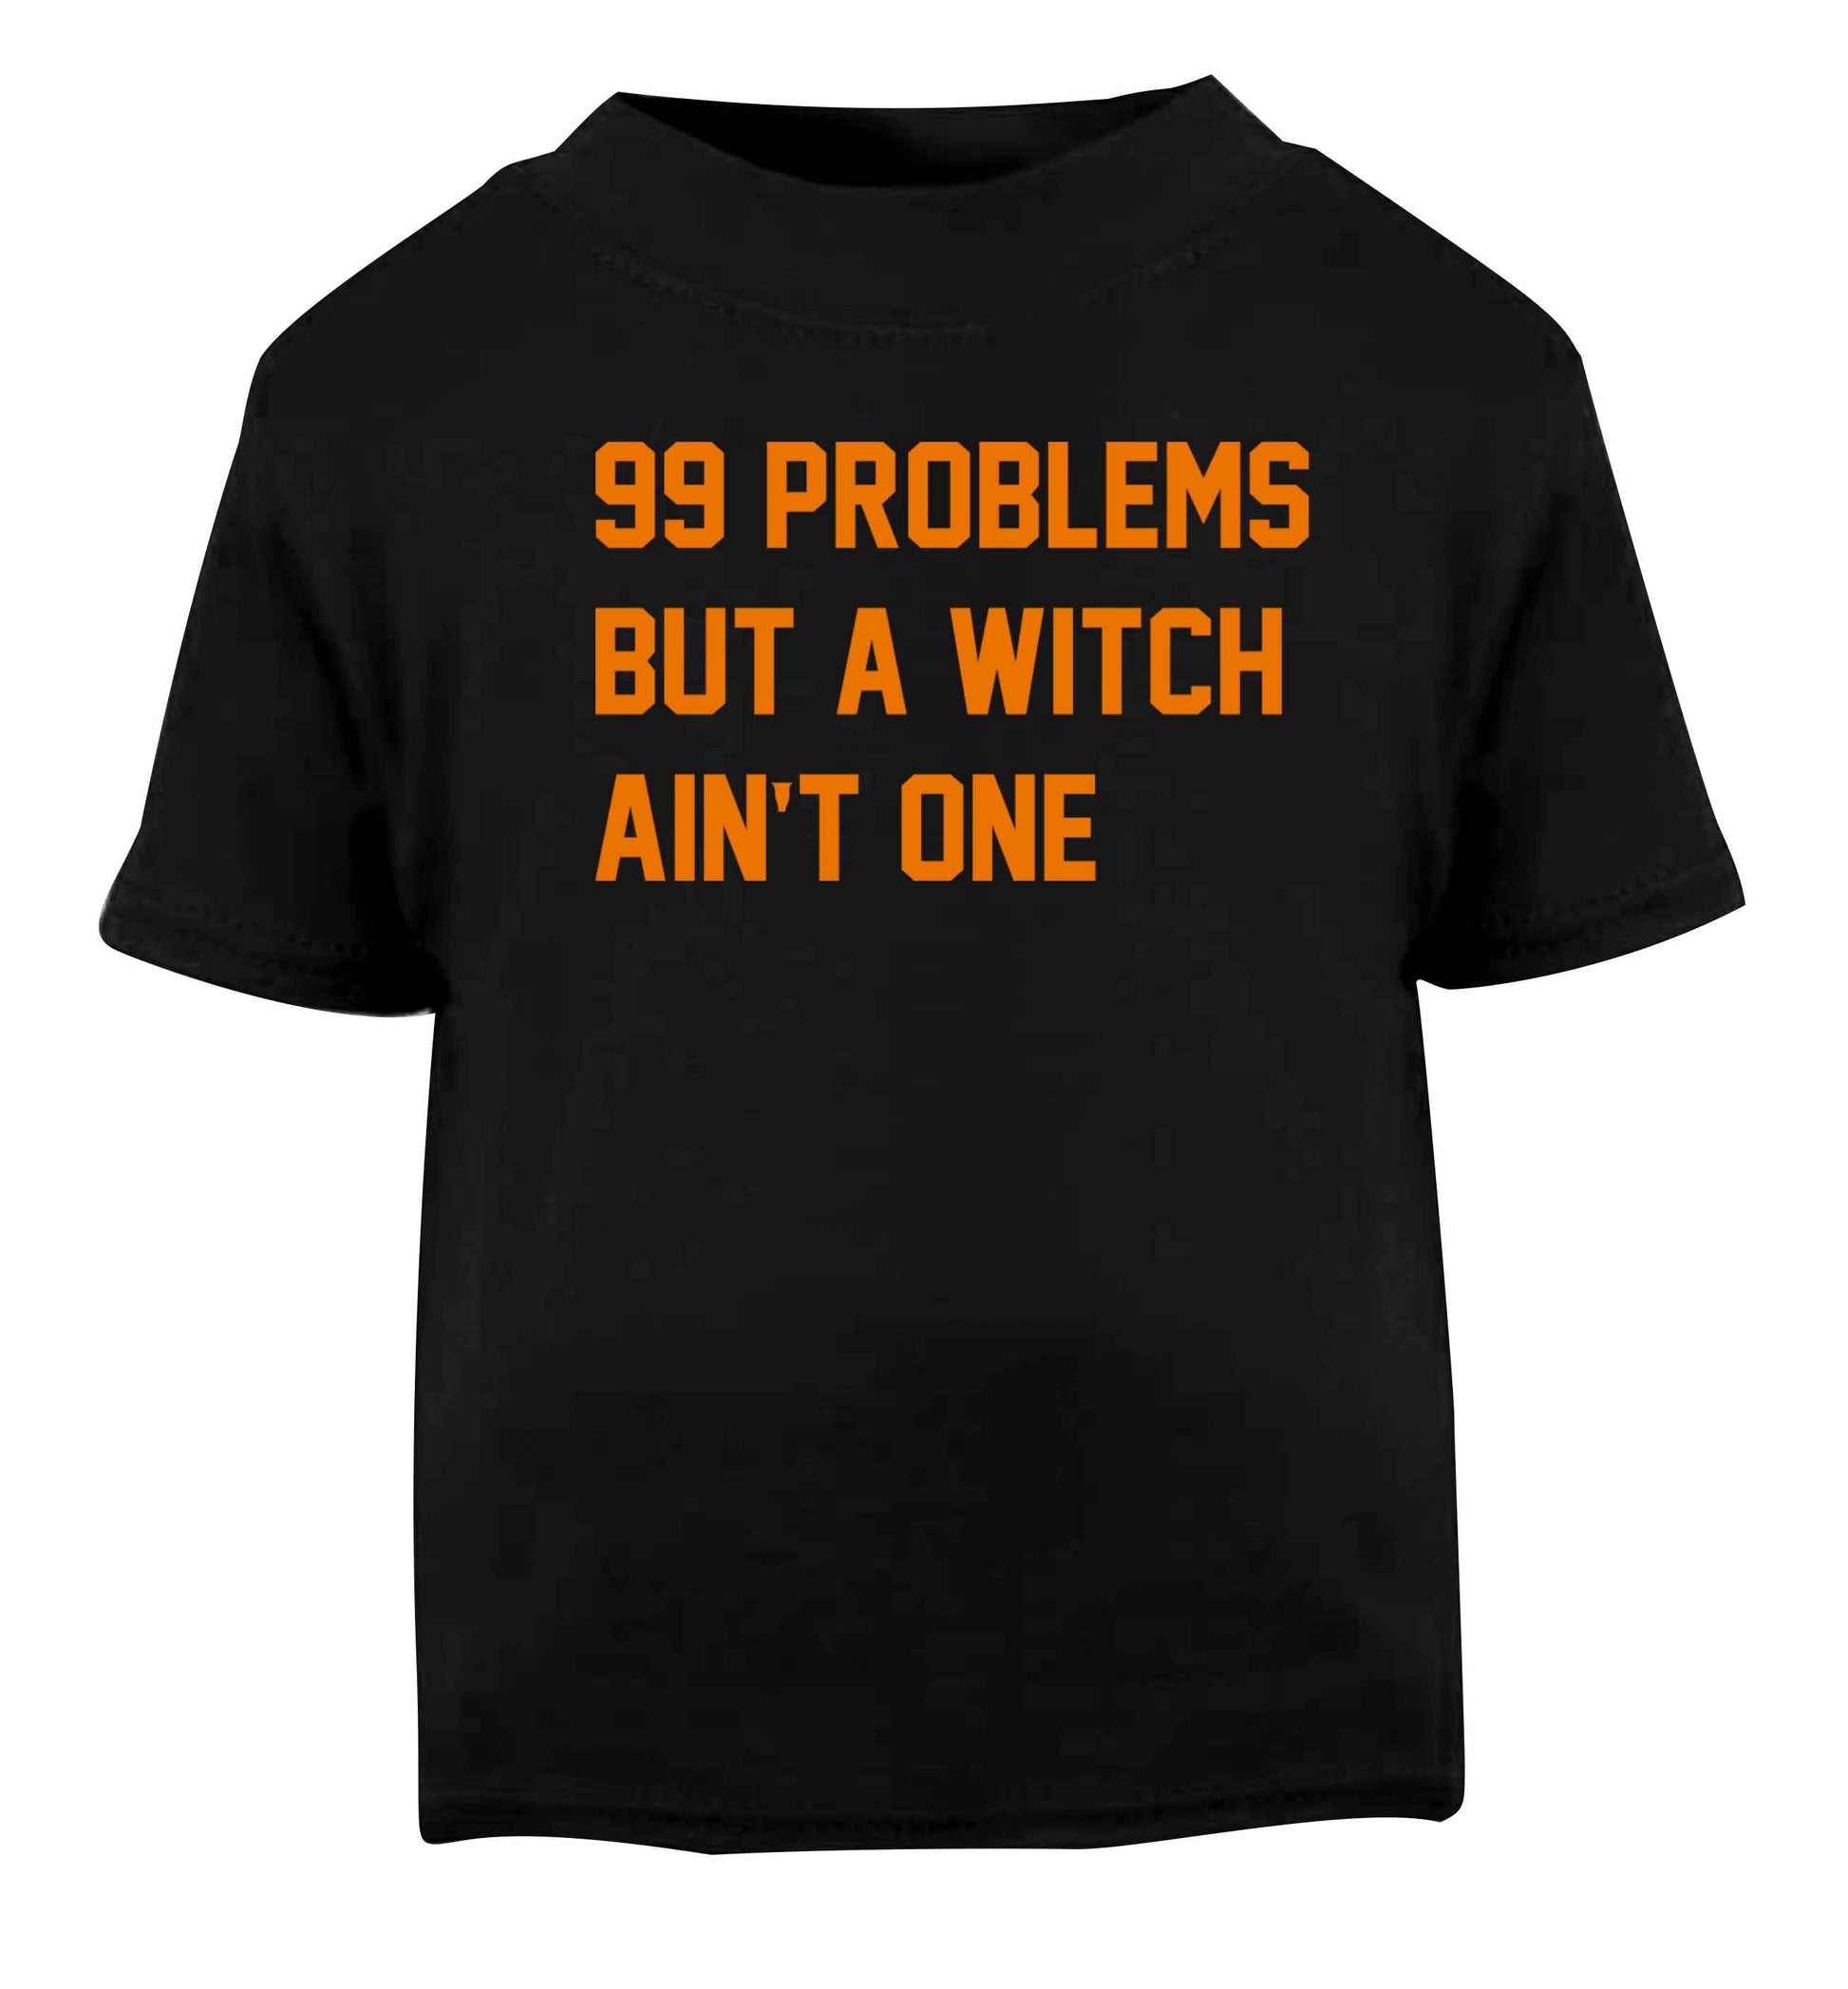 99 Problems but a witch aint one Black baby toddler Tshirt 2 years